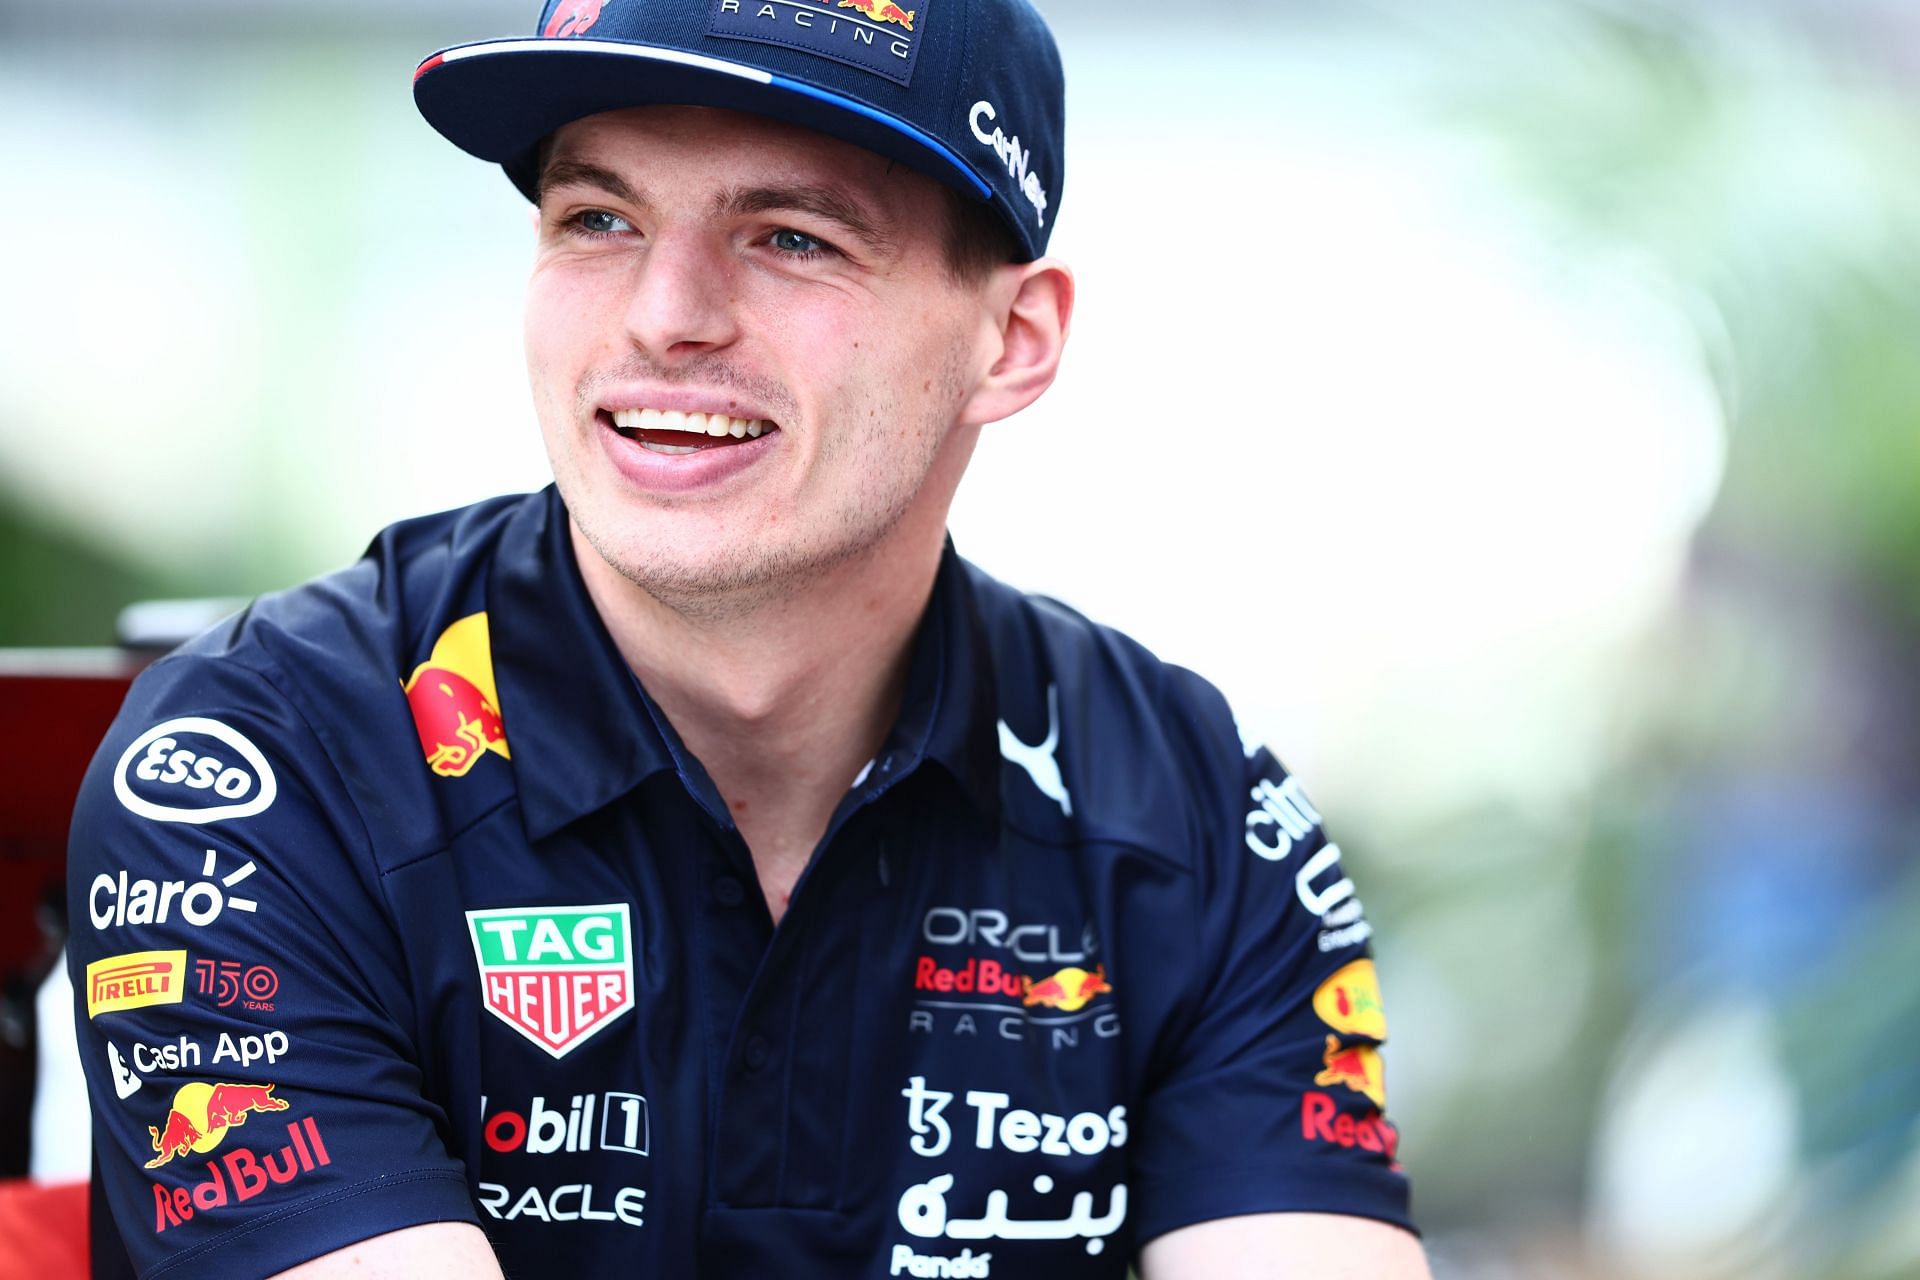 Max Verstappen smiles in the Paddock during previews ahead of the 2022 Saudi Arabian GP in Jeddah, Saudi Arabia. (Photo by Mark Thompson/Getty Images)